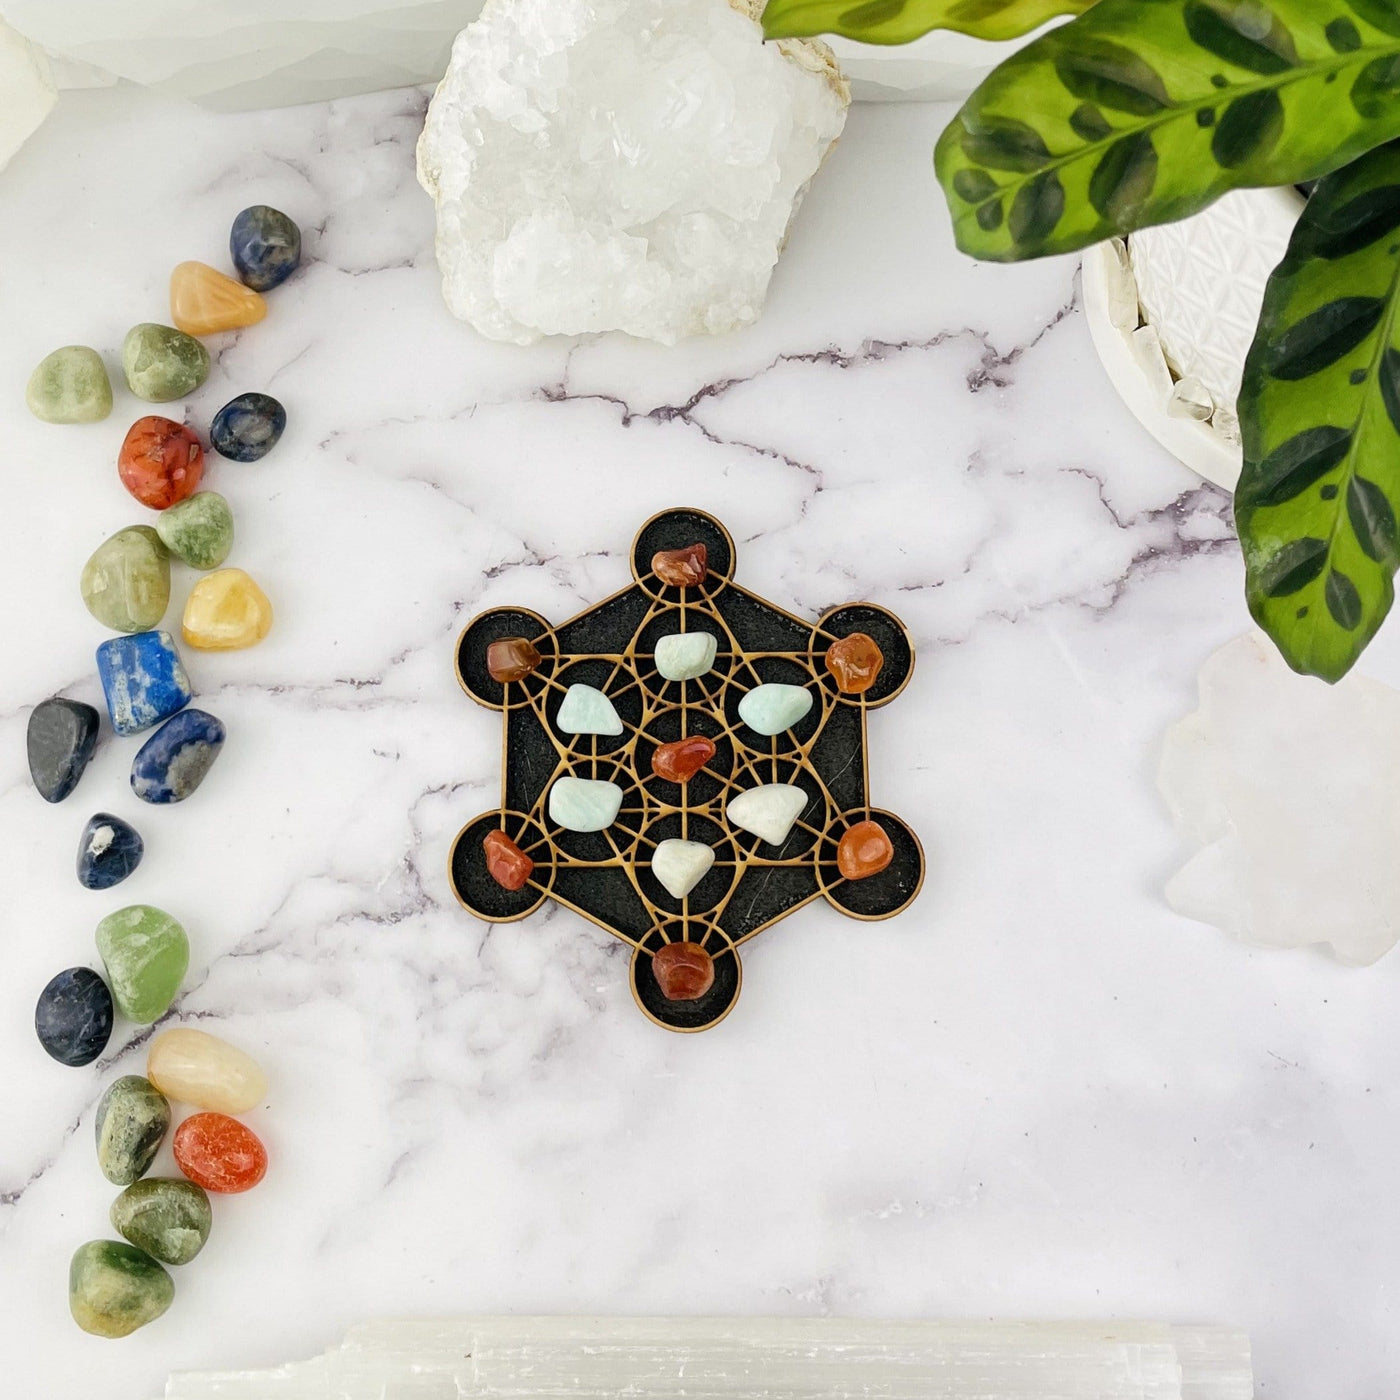 Metatron Cube mini Crystal Grid - on a table with stones on it and stones scattered next to it